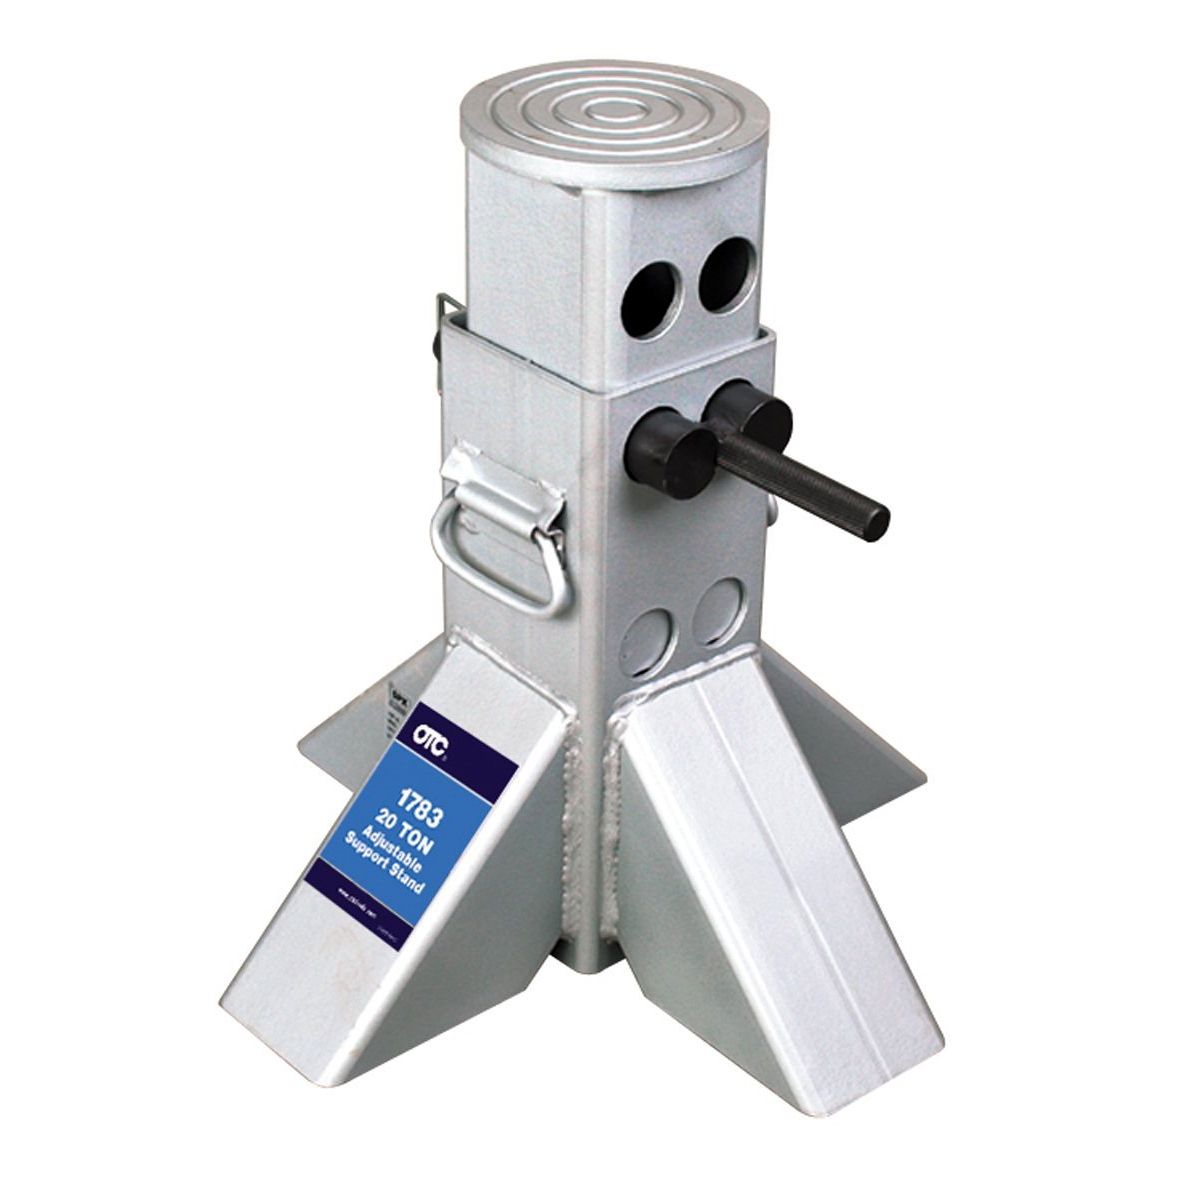 Heavy Duty Adjustable Support Stand - 20 Ton